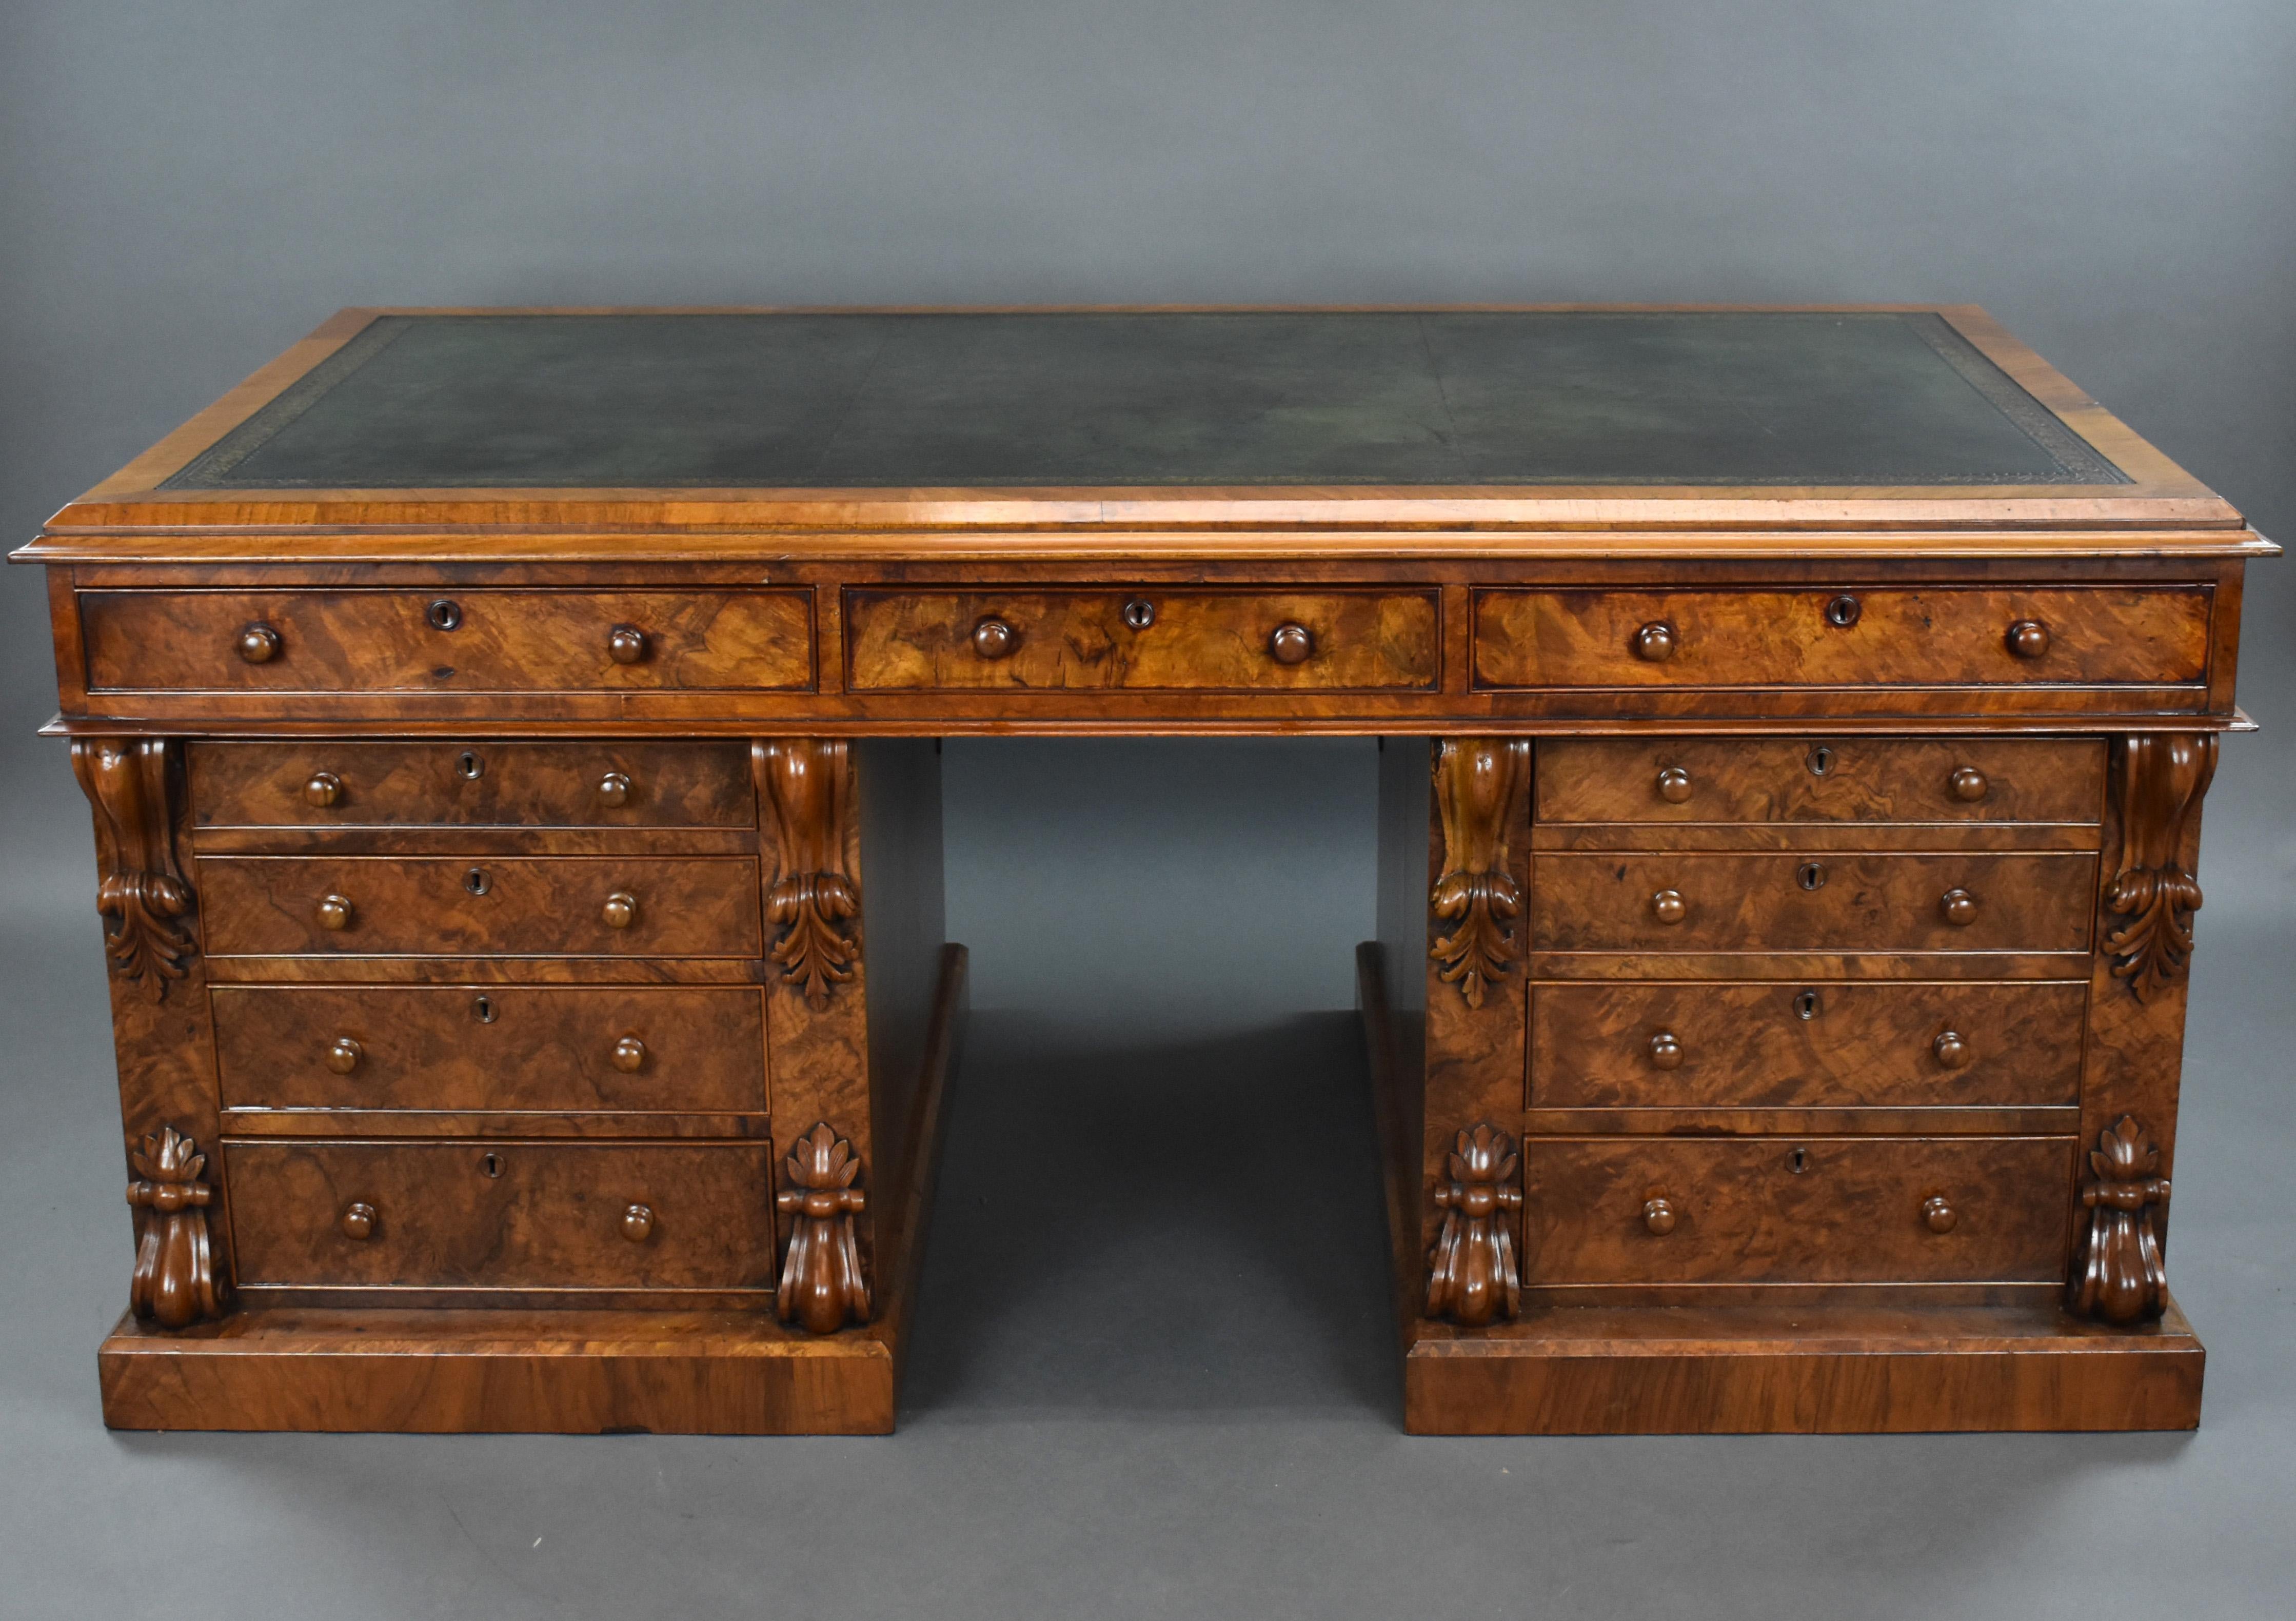 For sale is a good quality Victorian burr walnut partners desk. The top inset with a green leather skiver decorated with tooling, above an arrangement of three drawers to the front, and three drawers on the opposing side. The top fits onto two